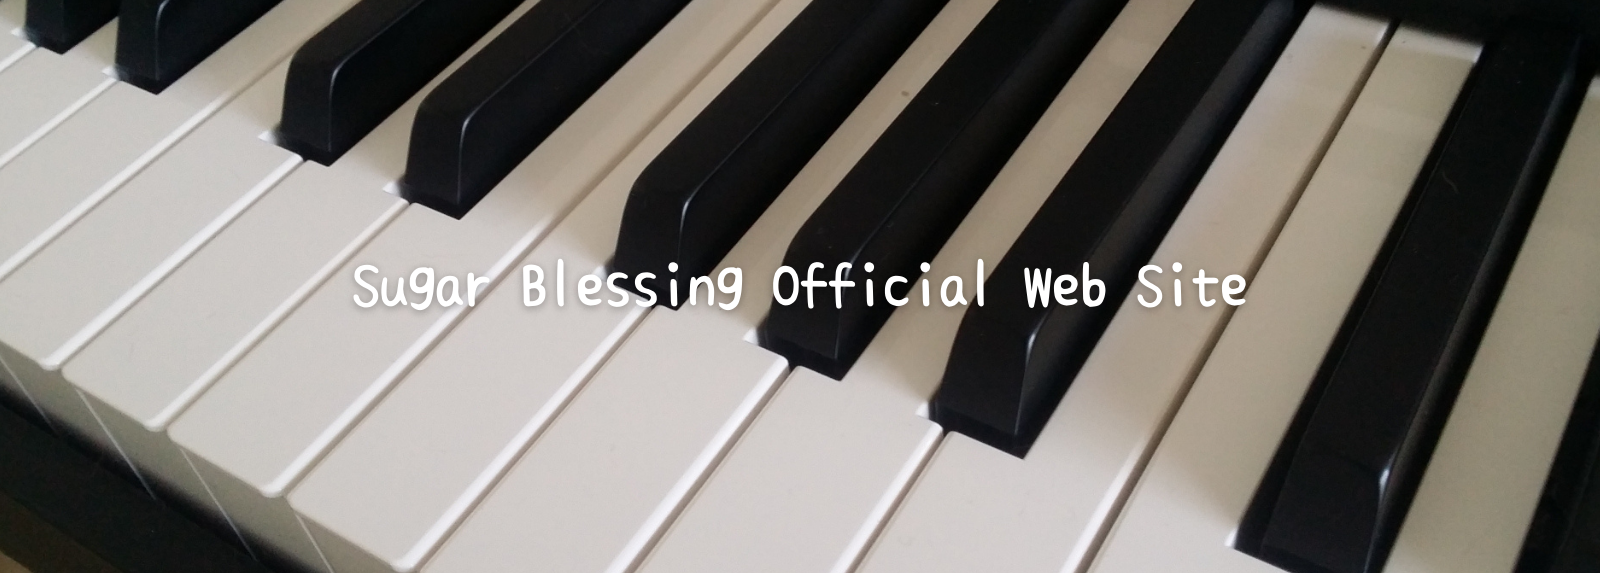 SugarBlessing Official Web Site